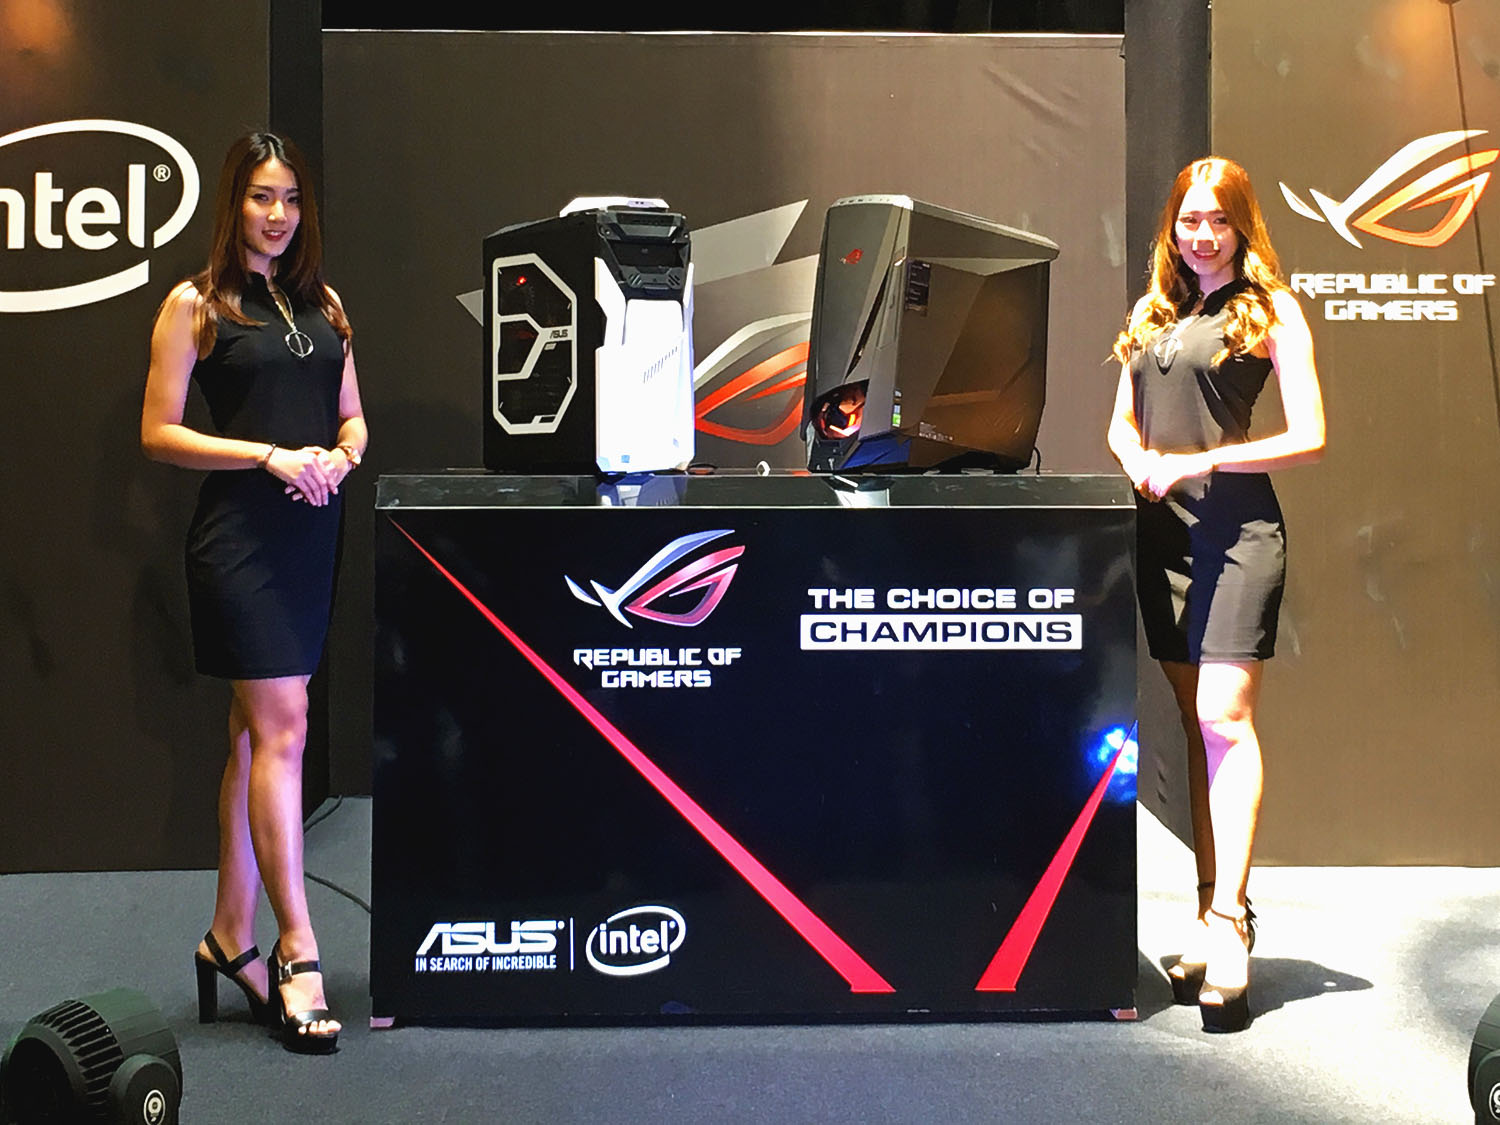 ASUS ROG Zephyrus Officially Launched with Two ROG Desktops